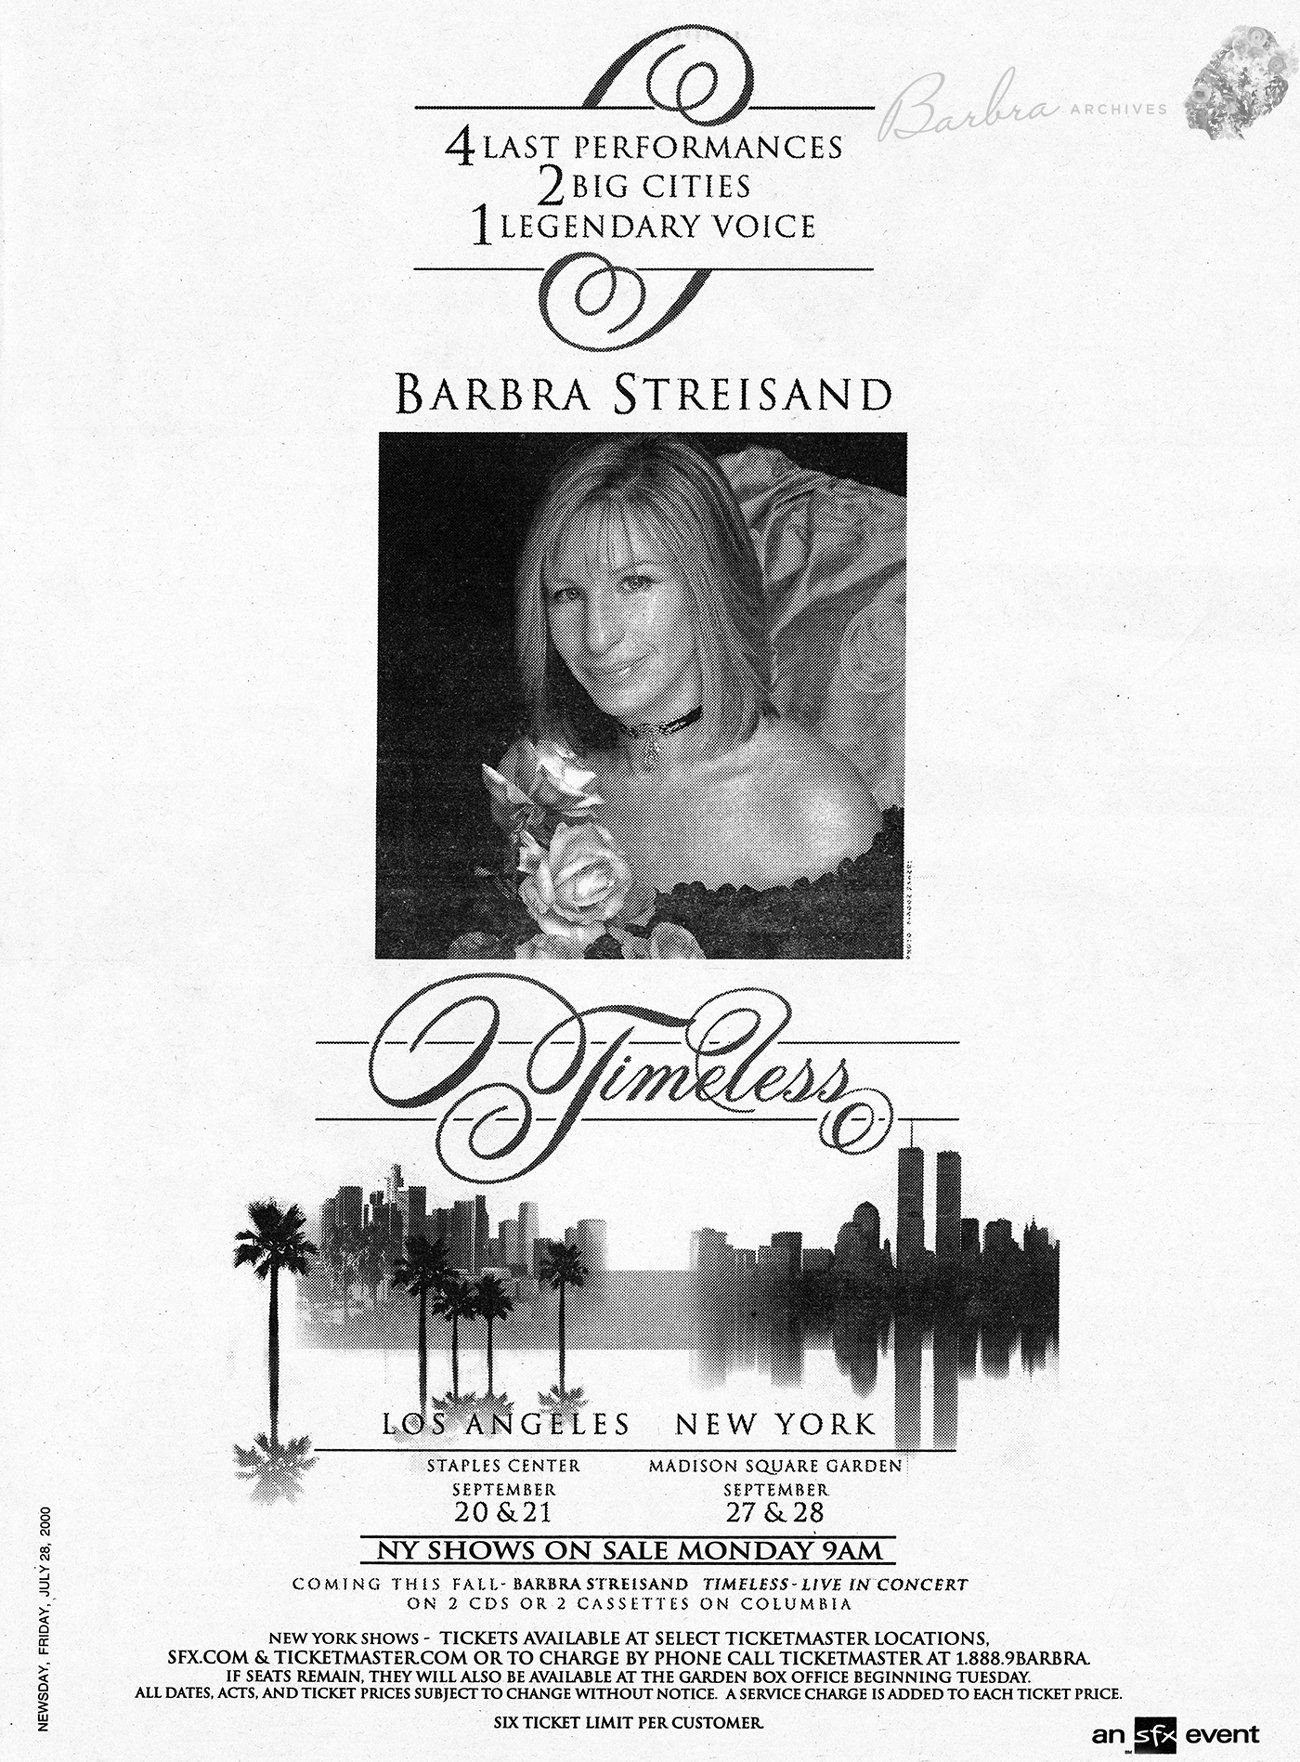 Newspaper ad for Streisand's 4 